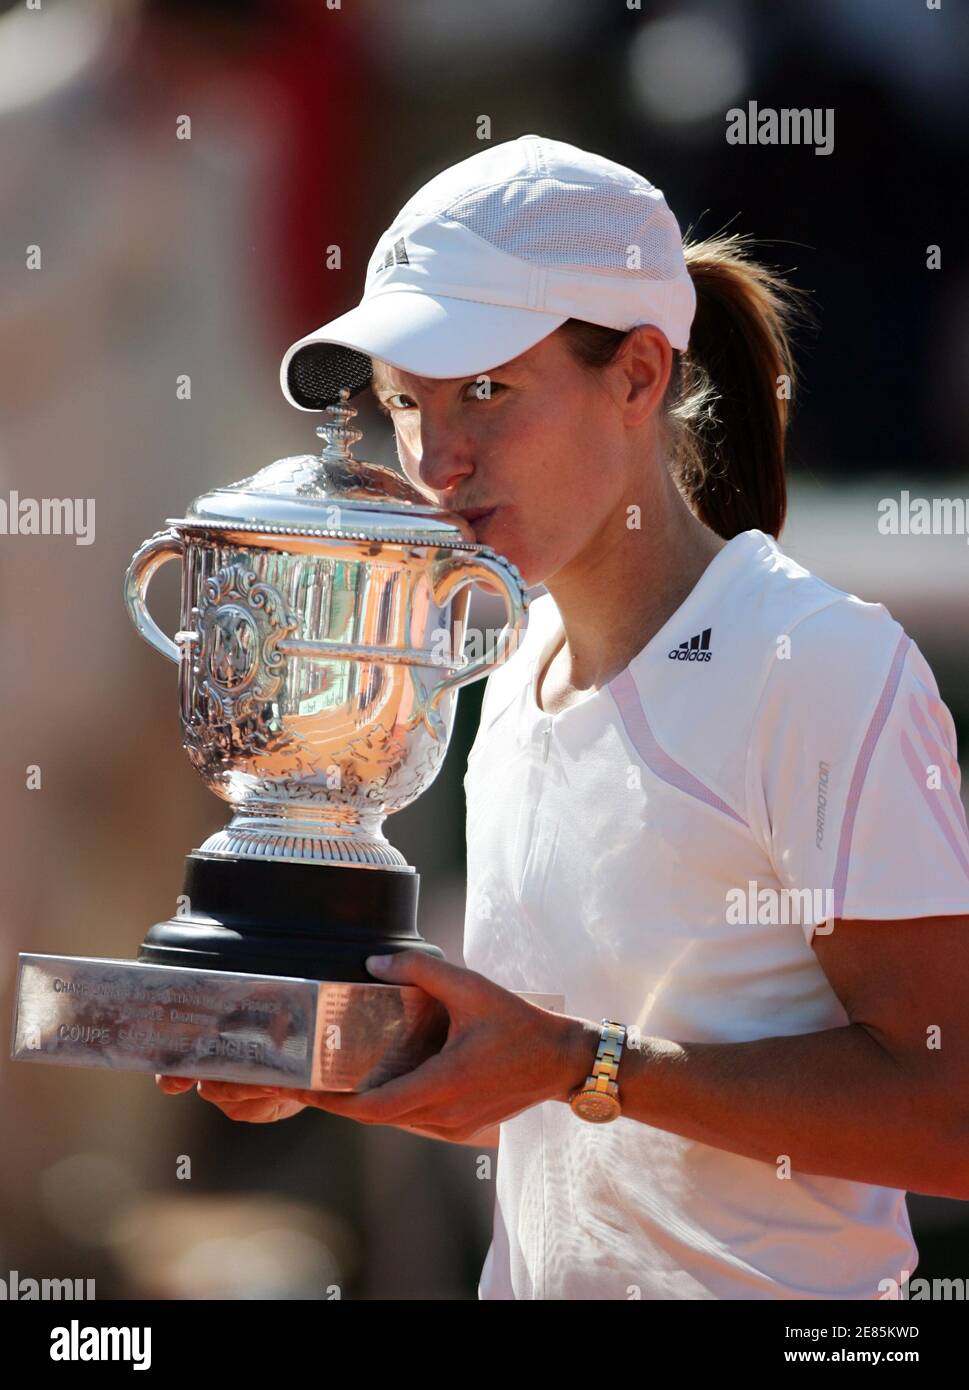 Belgium's Justine Henin-Hardenne kisses her trophy after winning the final  against[Russia's Svetlana Kuznetsova] in the French Open tennis tournament  at Roland Garros in Paris, June 10, 2006 Stock Photo - Alamy